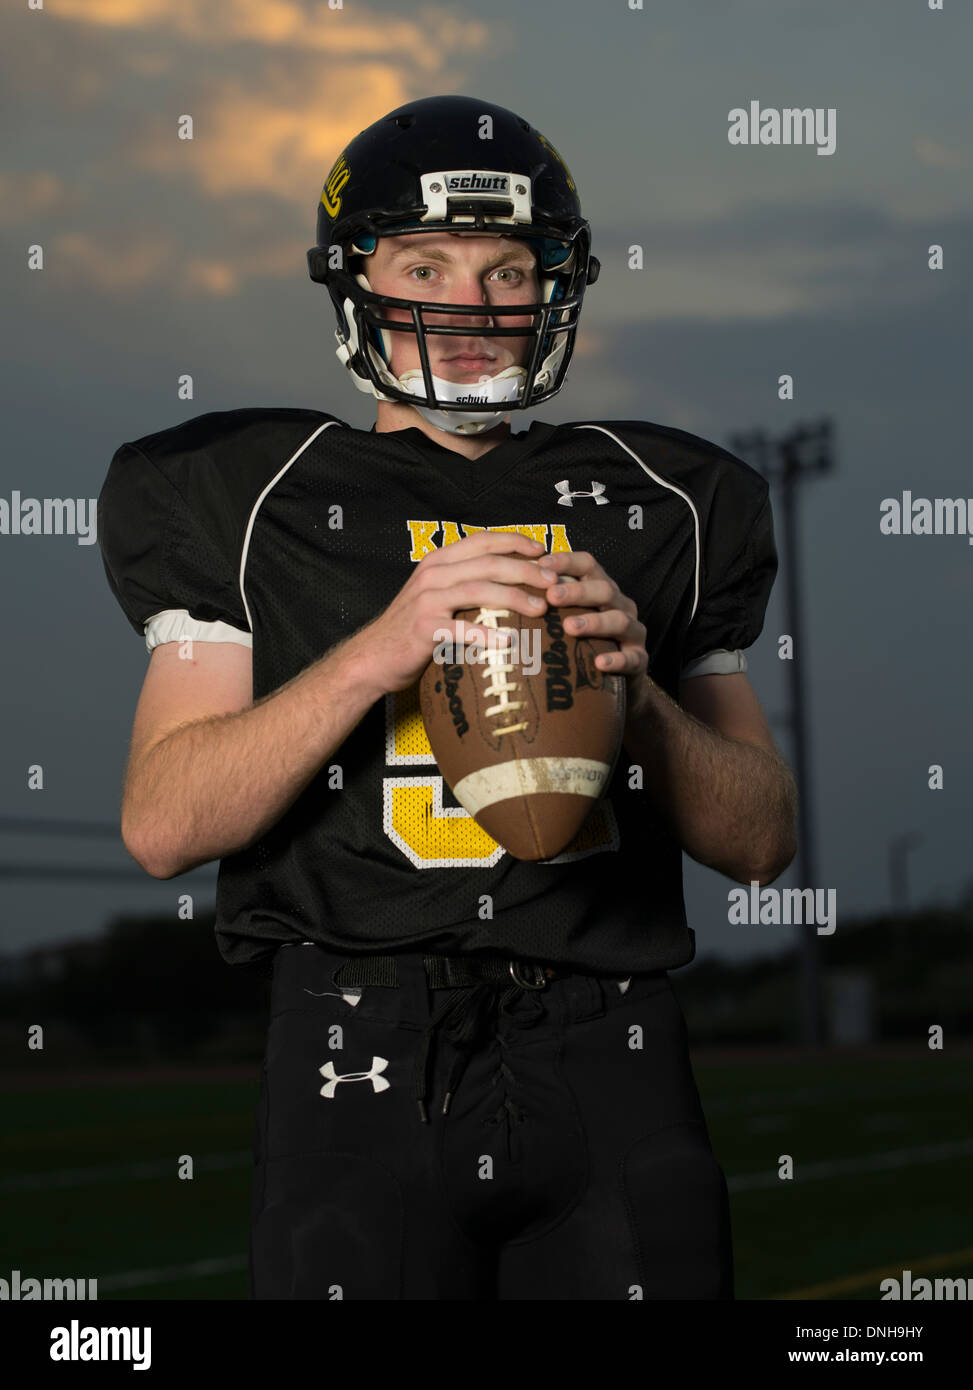 American High School Football Player in uniform with helmet and football. Stock Photo